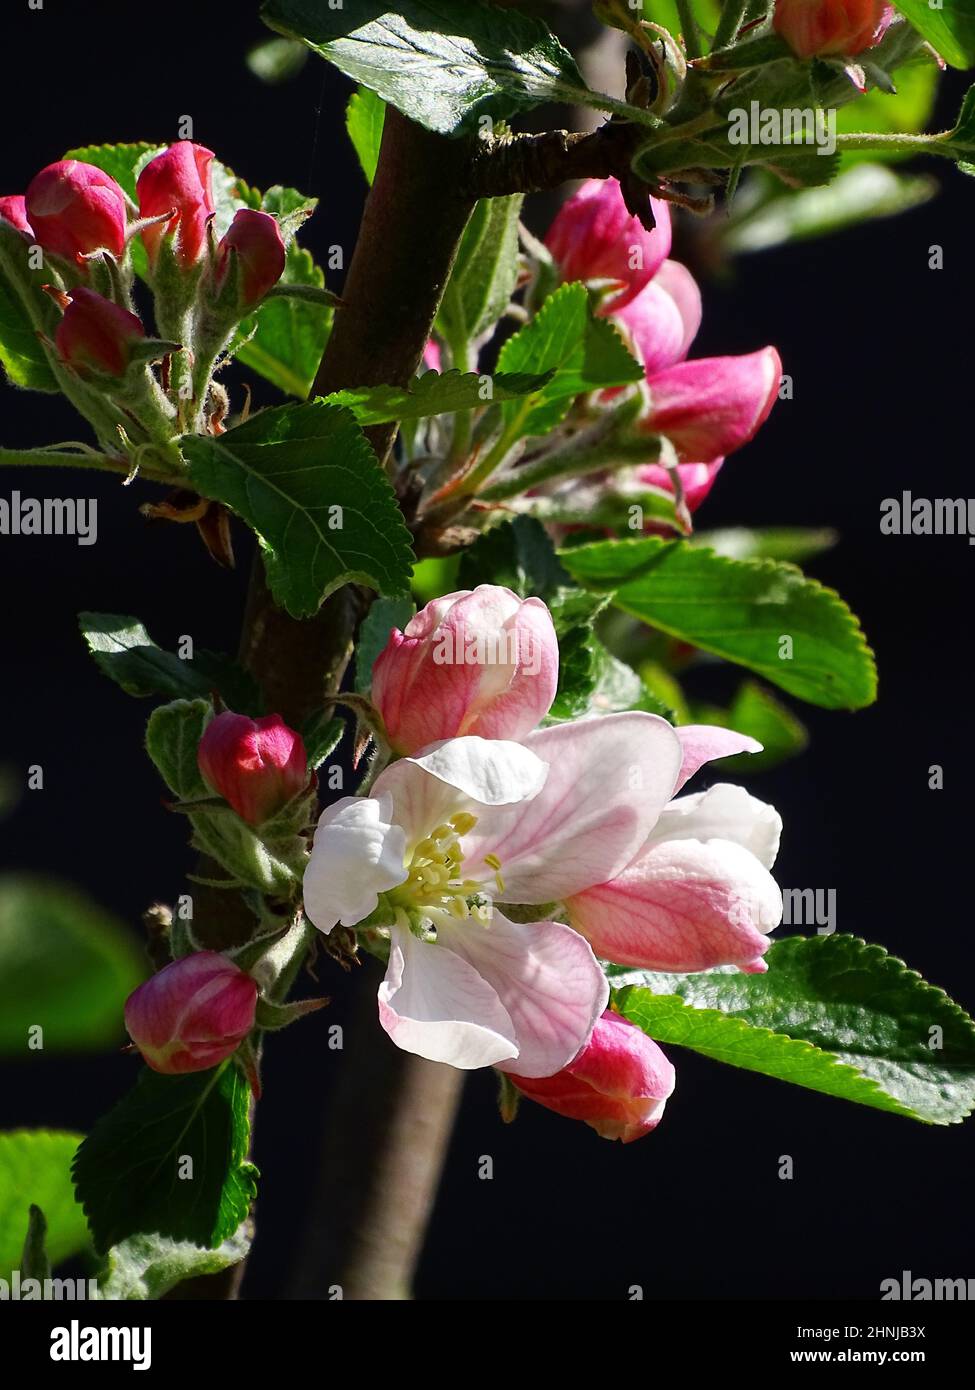 close up of the blossom of an apple tree (Cox orange pippin), with a blurred black background, with colors green, white, light purple and black Stock Photo